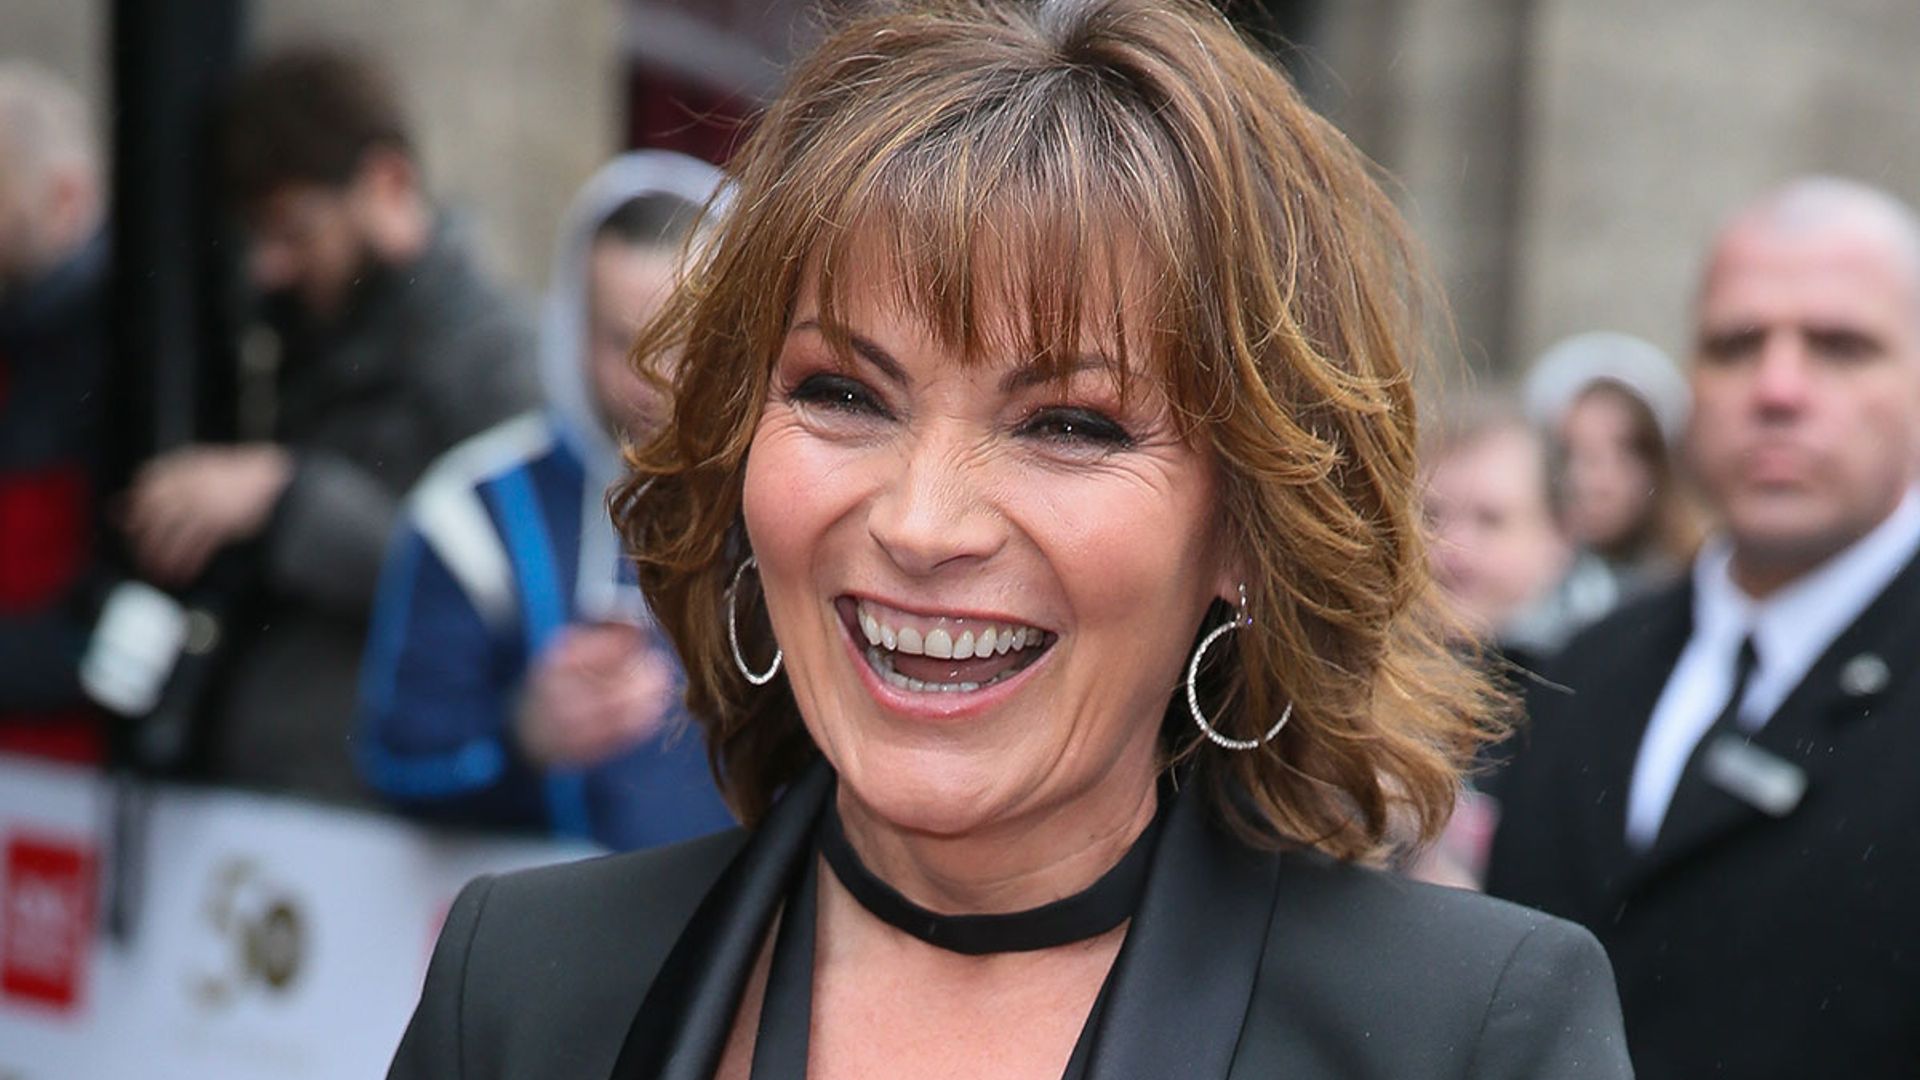 Lorraine Kelly's chic nautical outfit came entirely from the high street